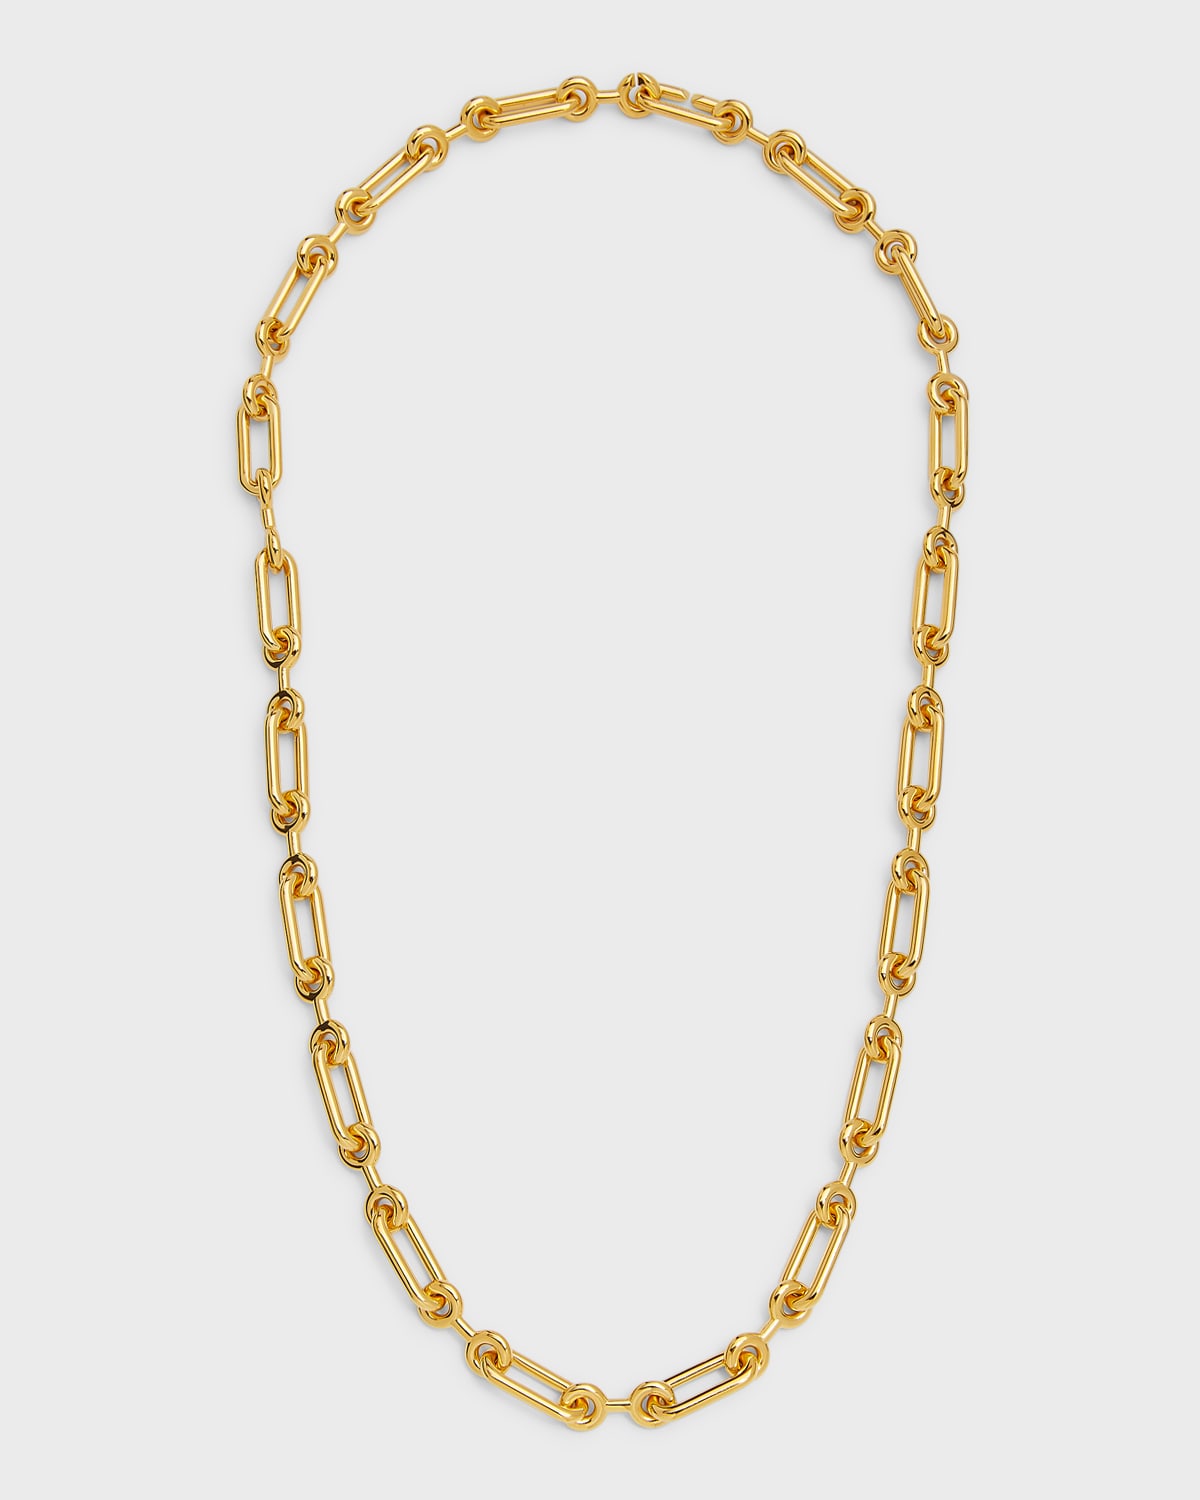 Petite Binary Chain Long Necklace in Gold Vermeil